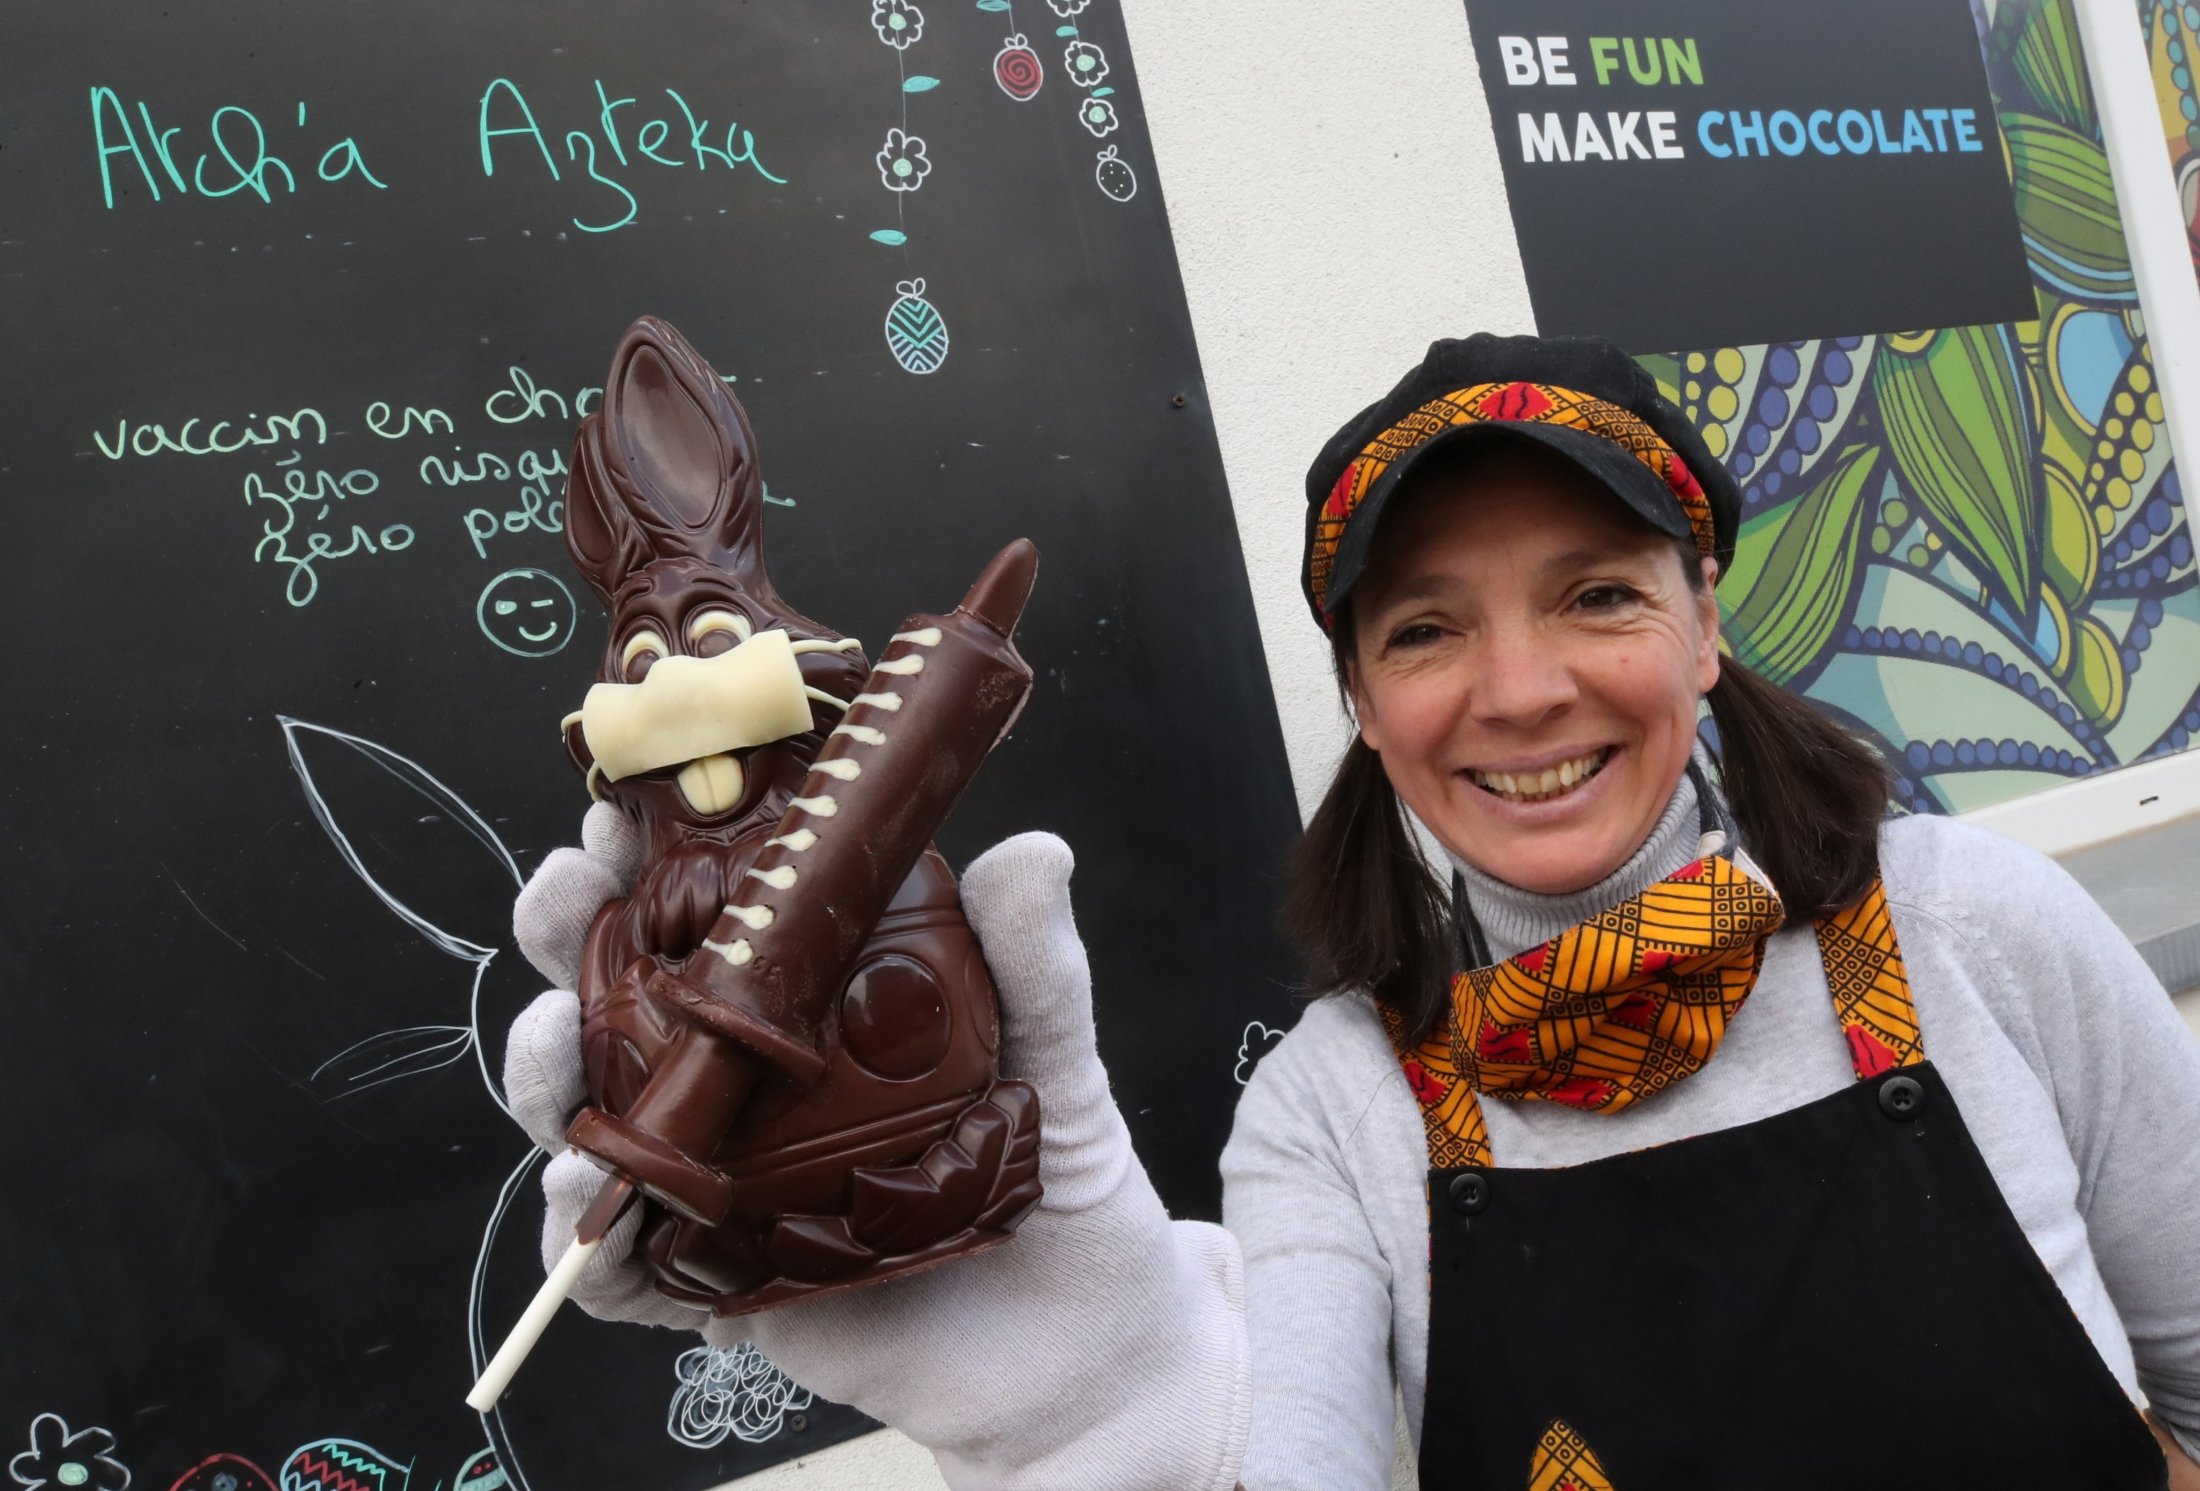 Belgian artisan chocolate maker Genevieve Trepant shows a chocolate bunny wearing a protective mask and holding a vaccine syringe called "L